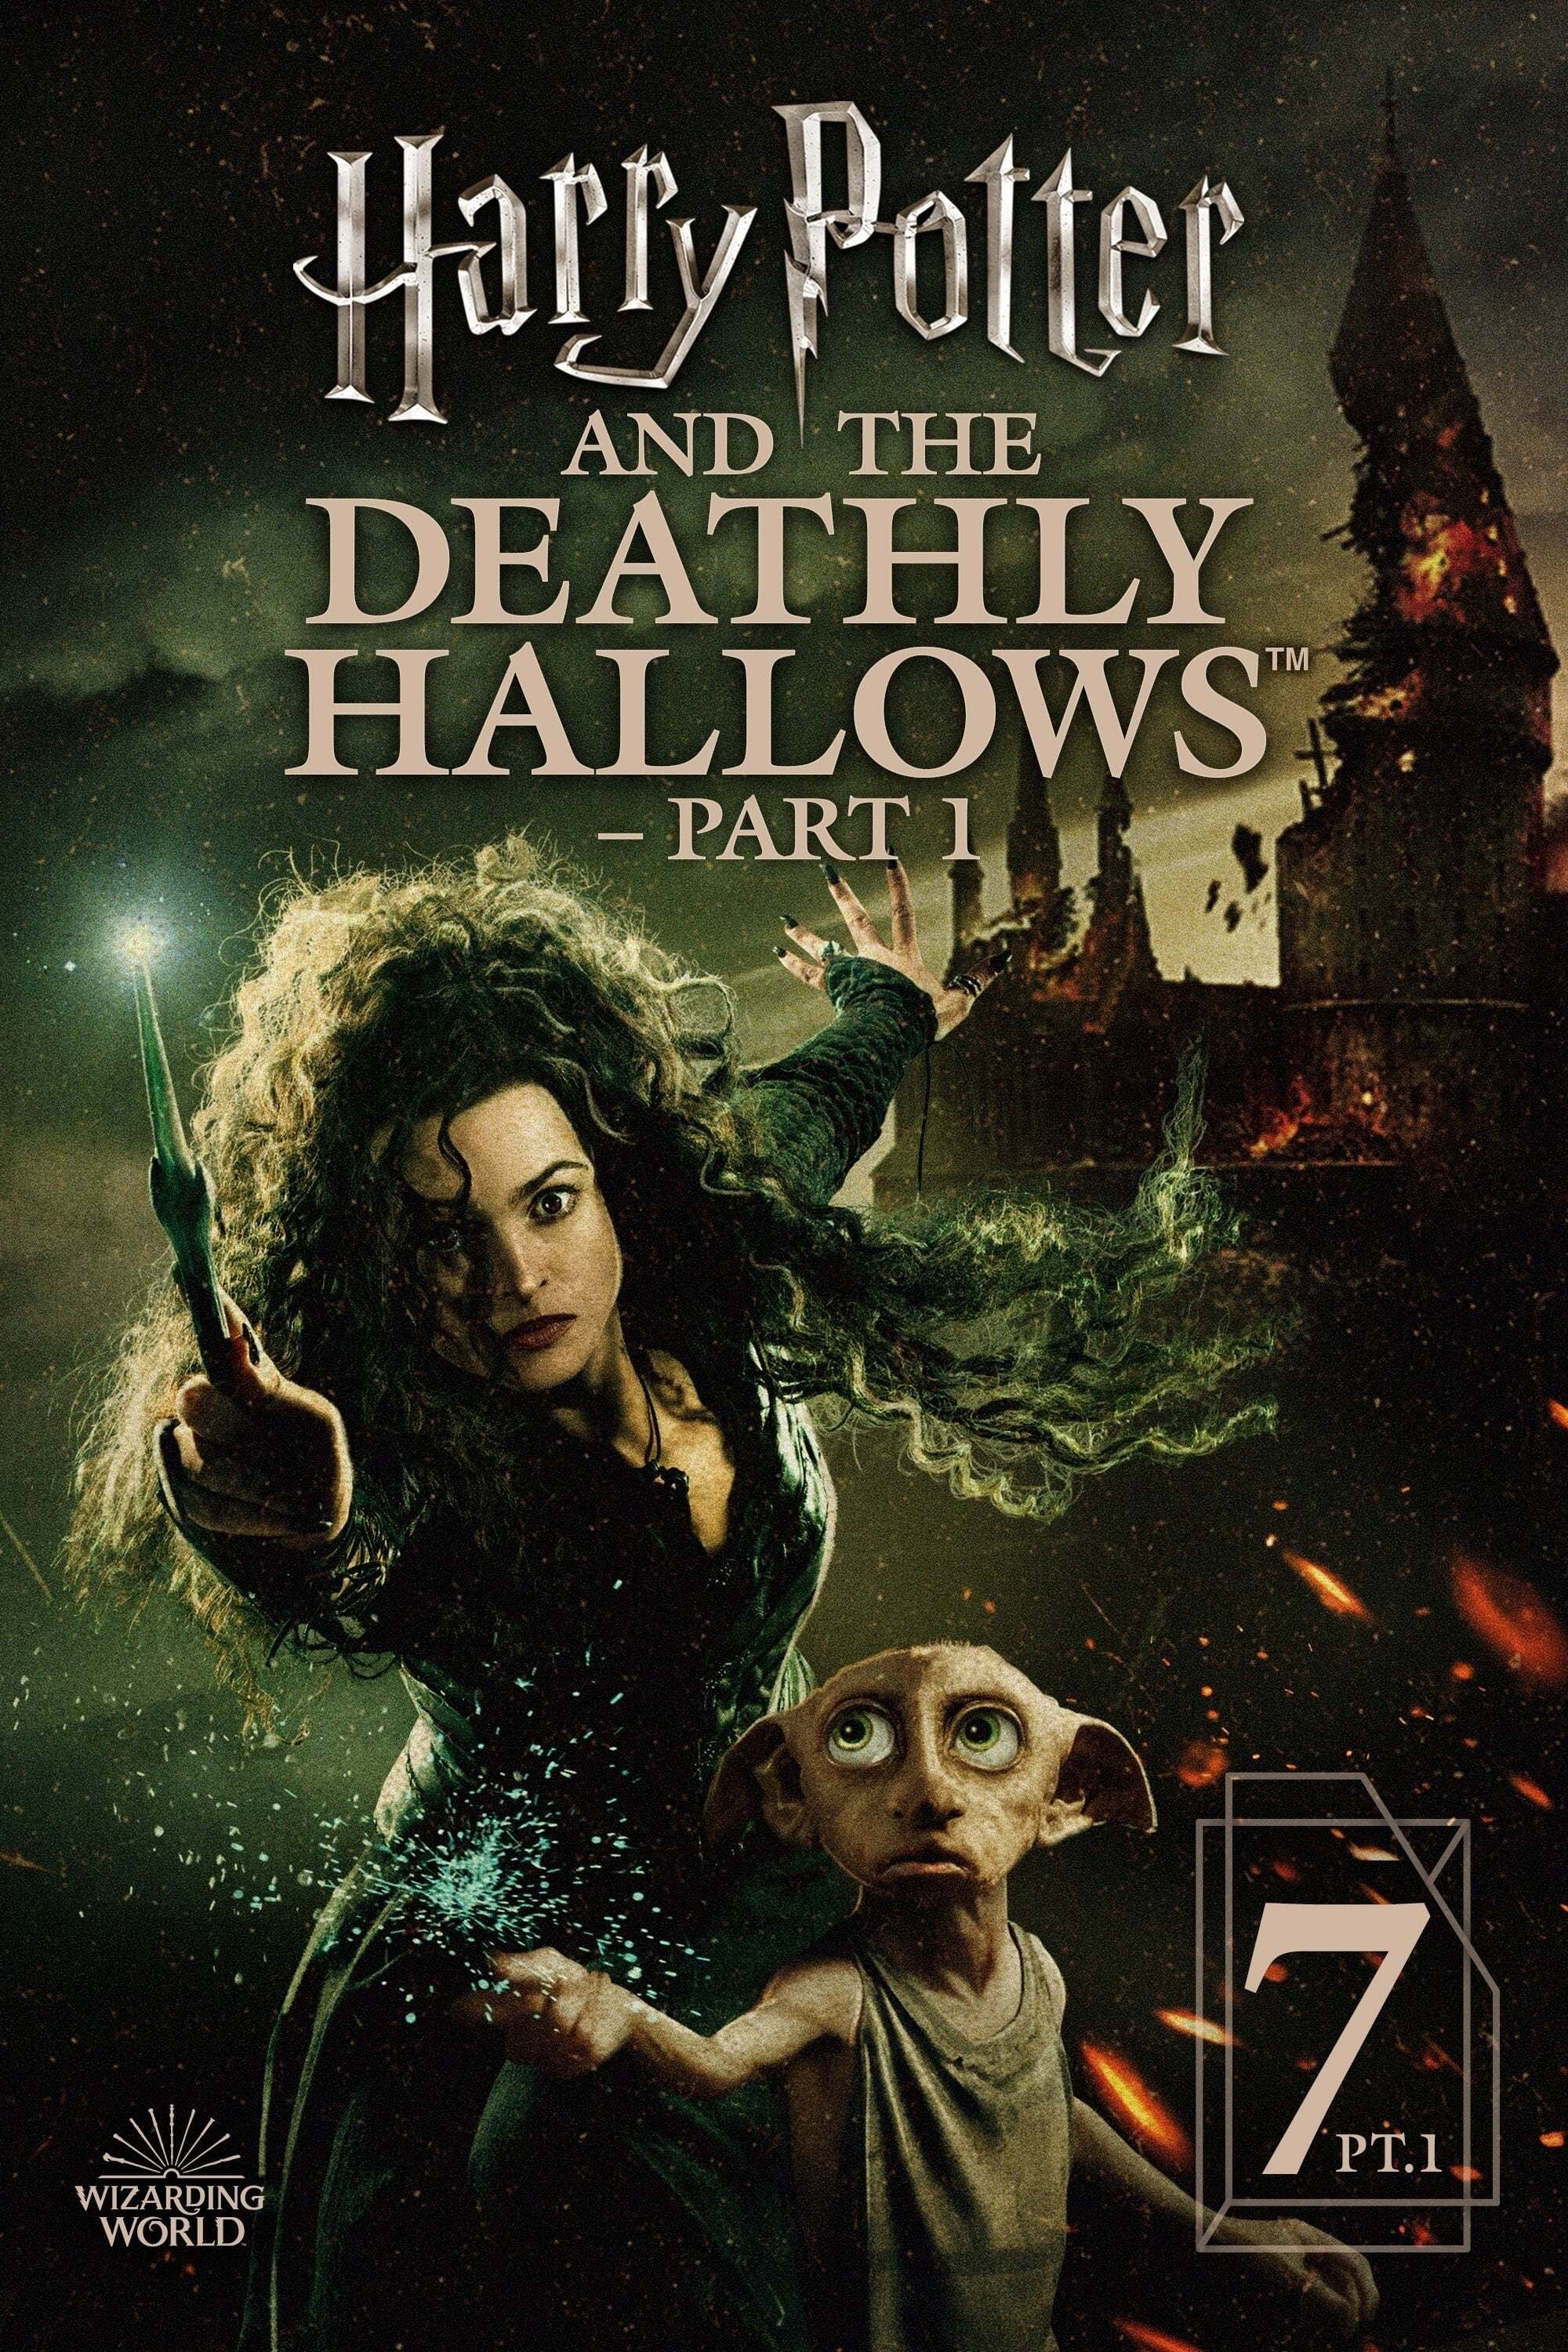 Harry Potter and the Deathly Hallows Part 1 (2010) REMUX 4K HDR Latino – CMHDD